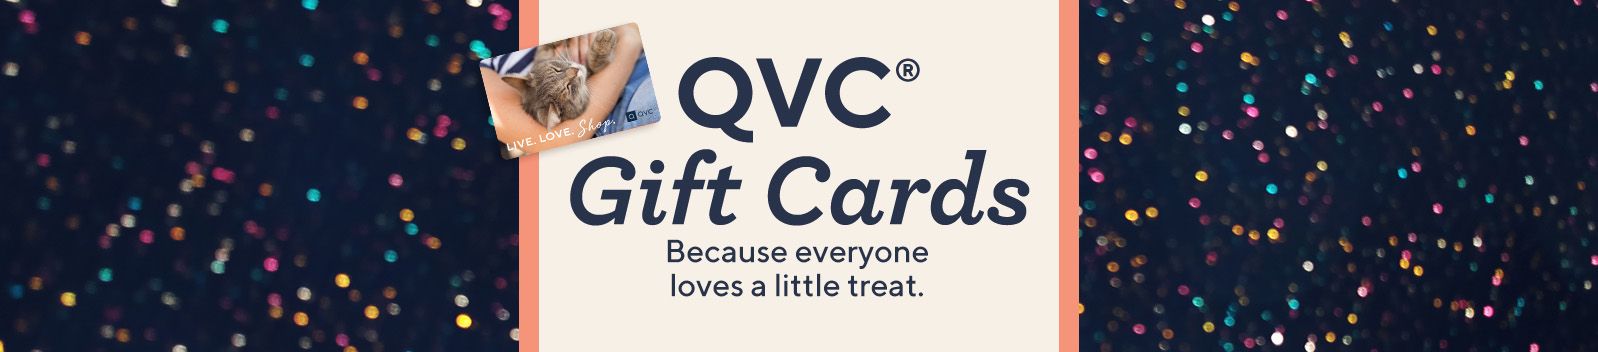 Qvc Gift Cards